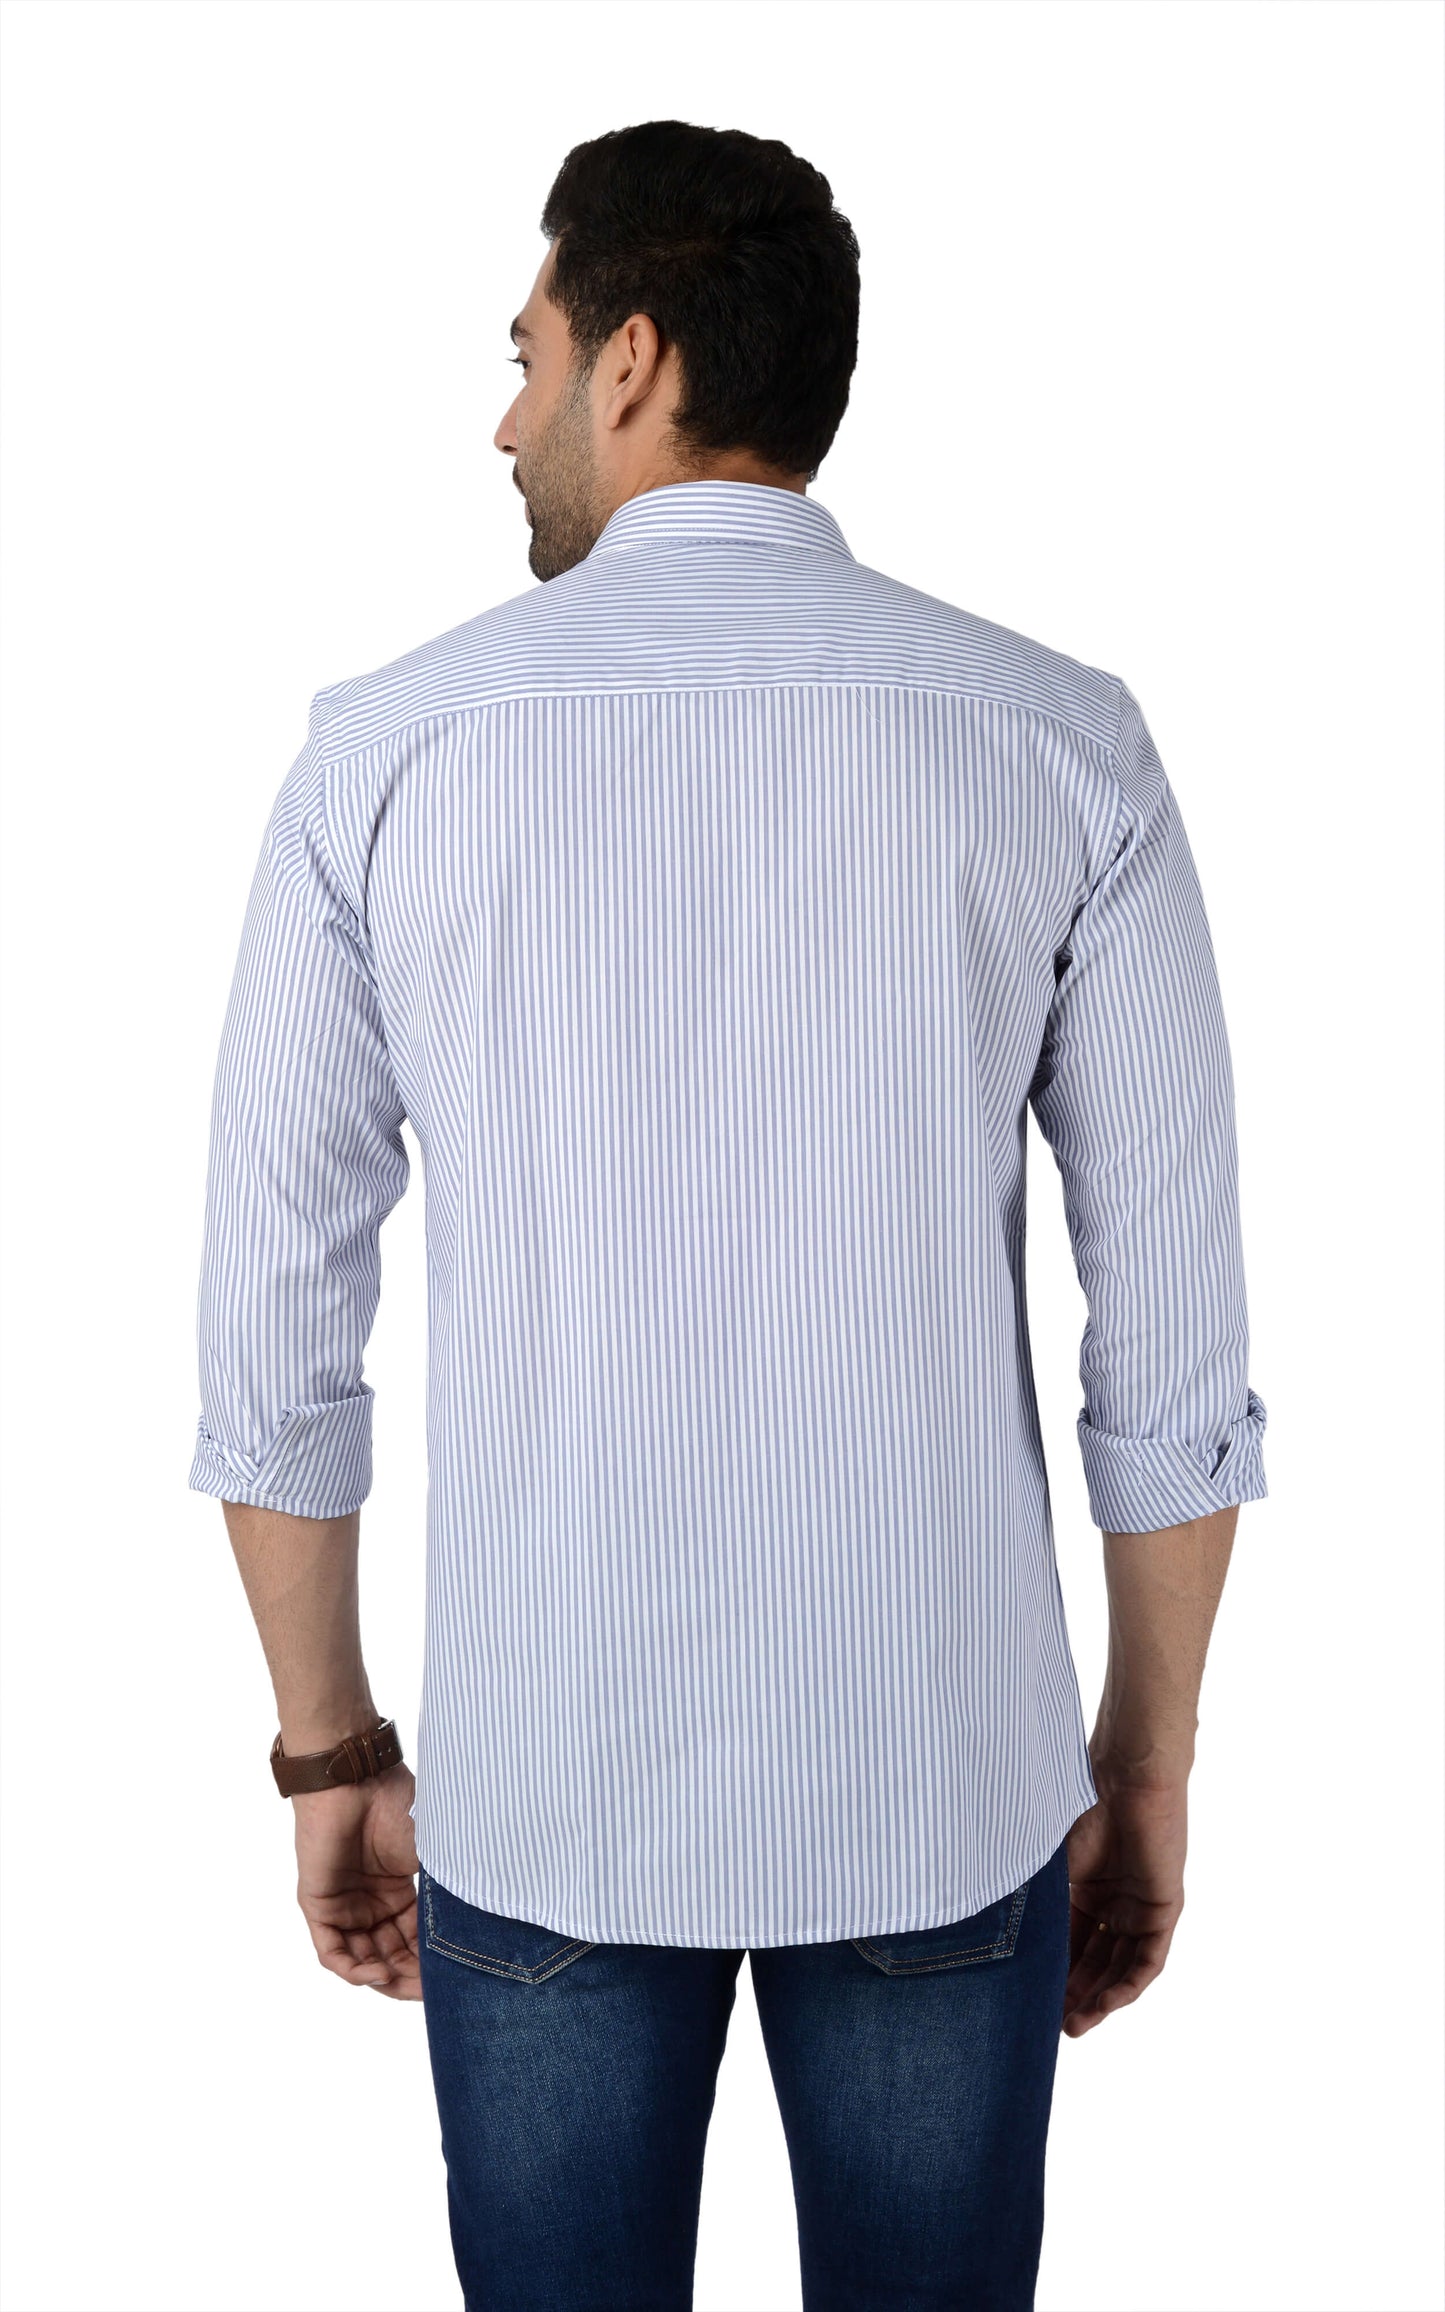 5thanfold Men's Pure Cotton Casual Full Sleeve Striped Blue Slim Fit Shirt